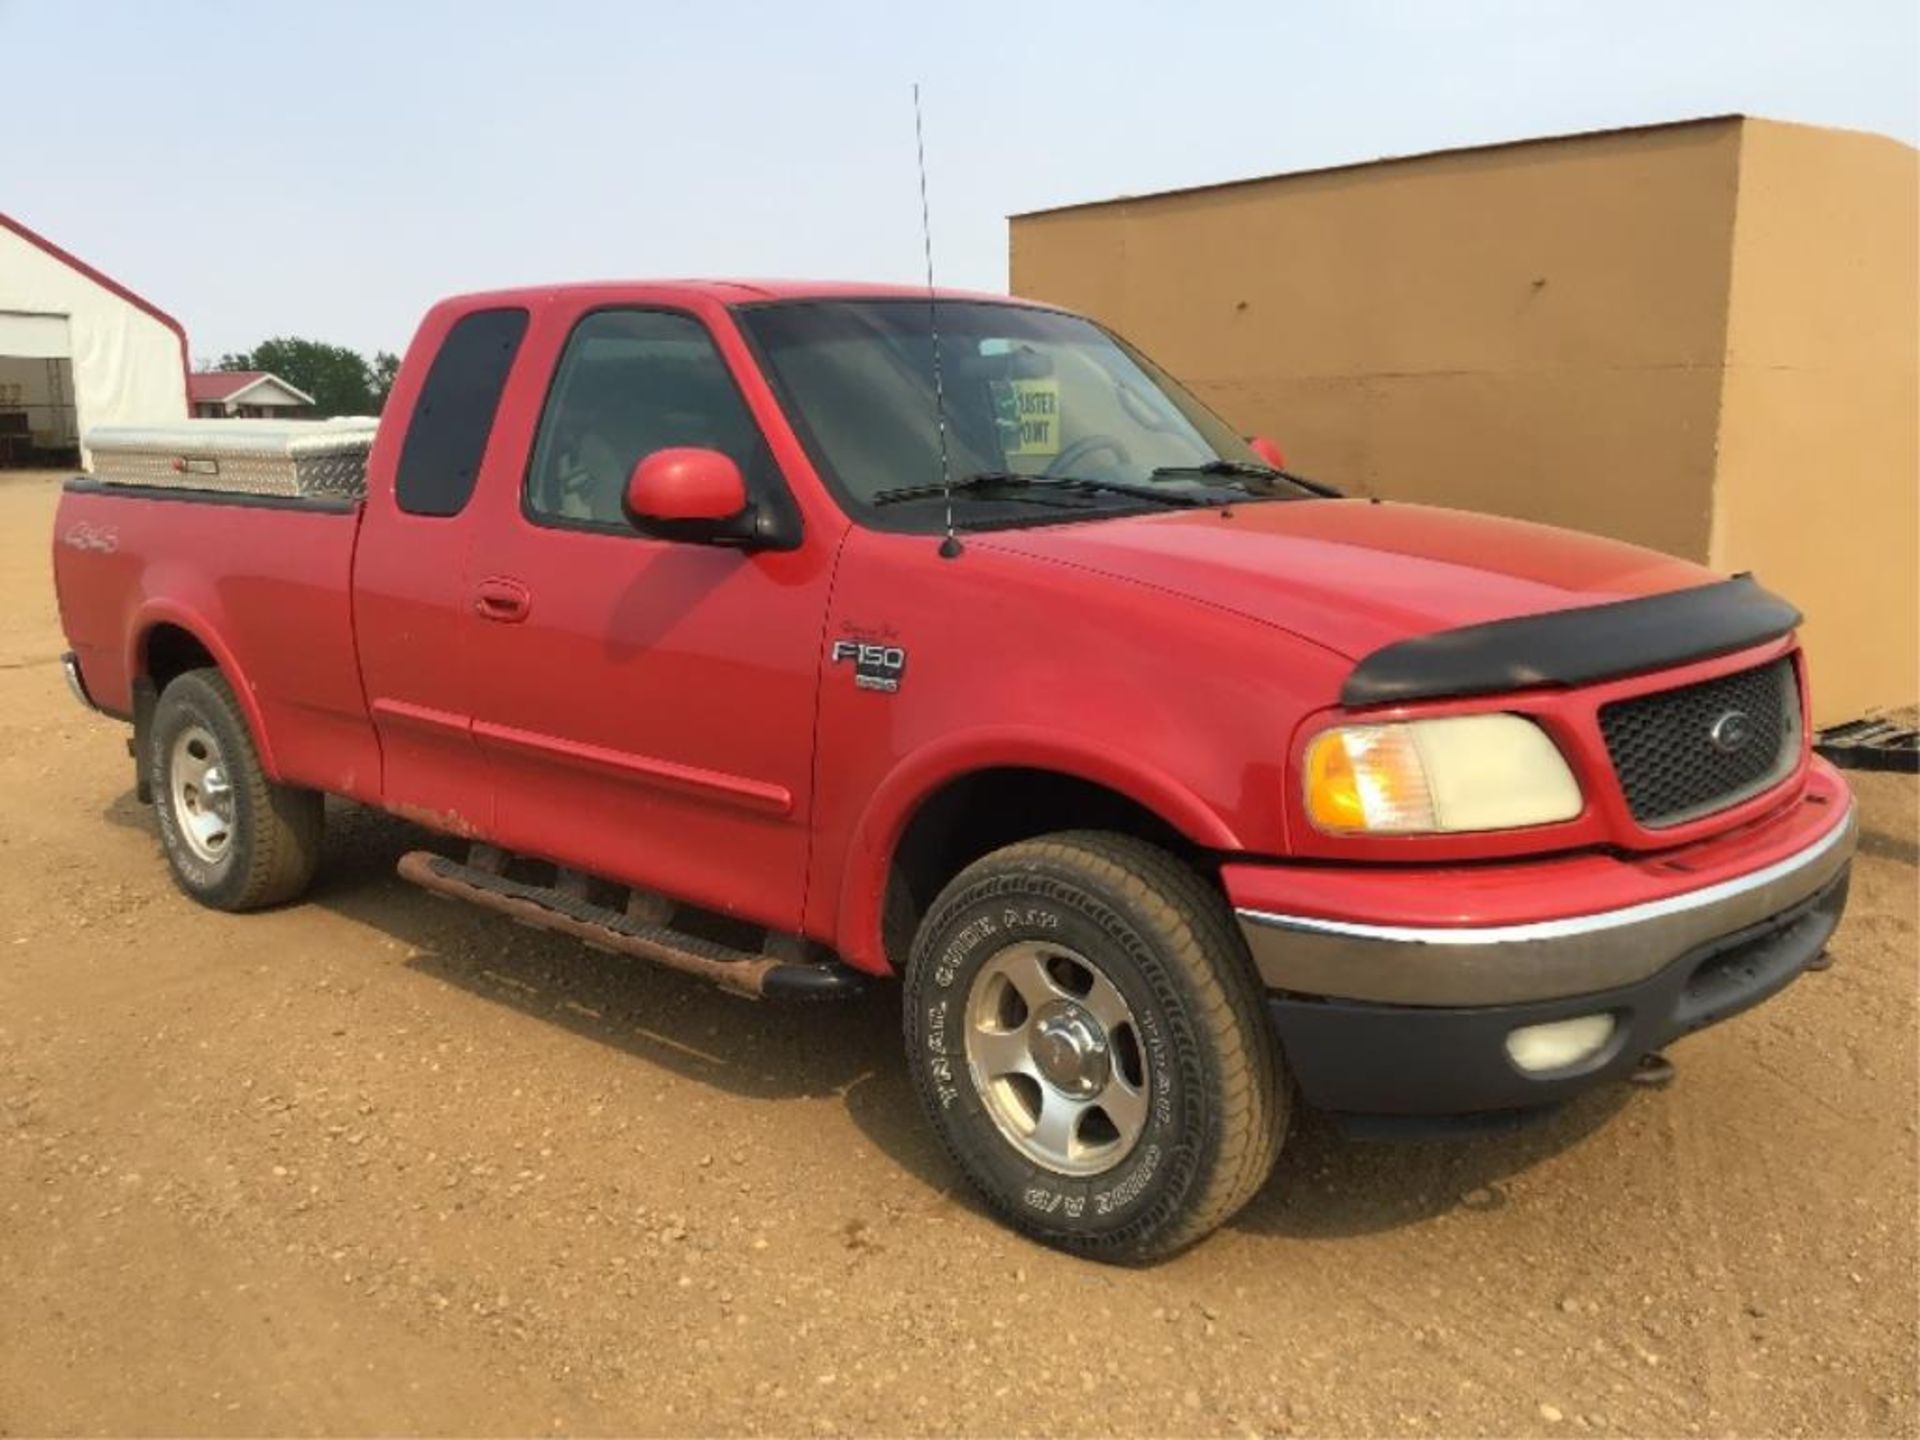 2000 F150 4x4 Ext/Cab Ford Pickup - Image 2 of 10